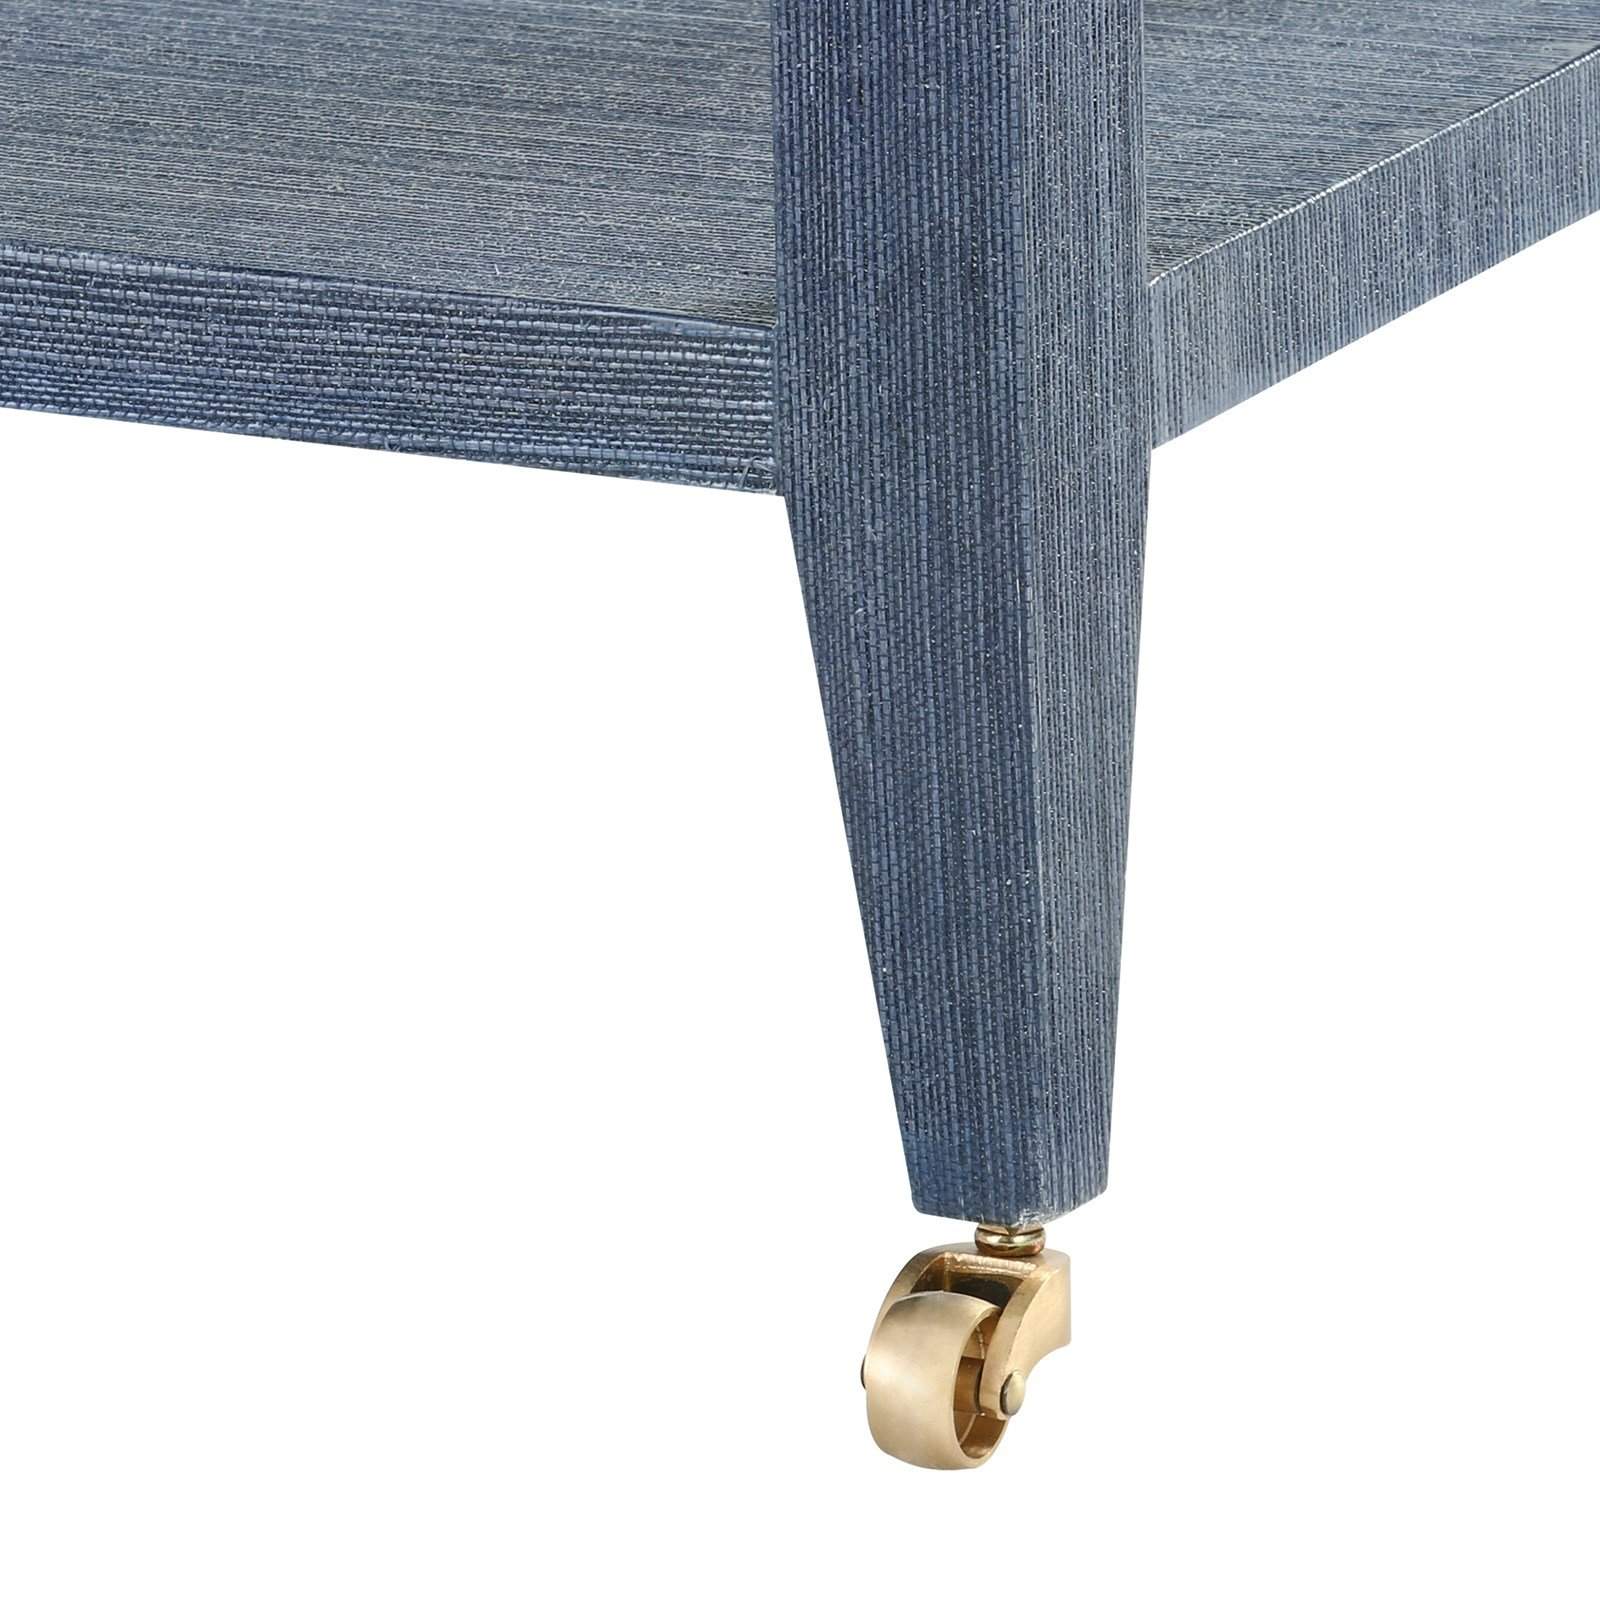 Villa & House - Isadora Console Table In Navy Blue-Bungalow 5-Blue Hand Home